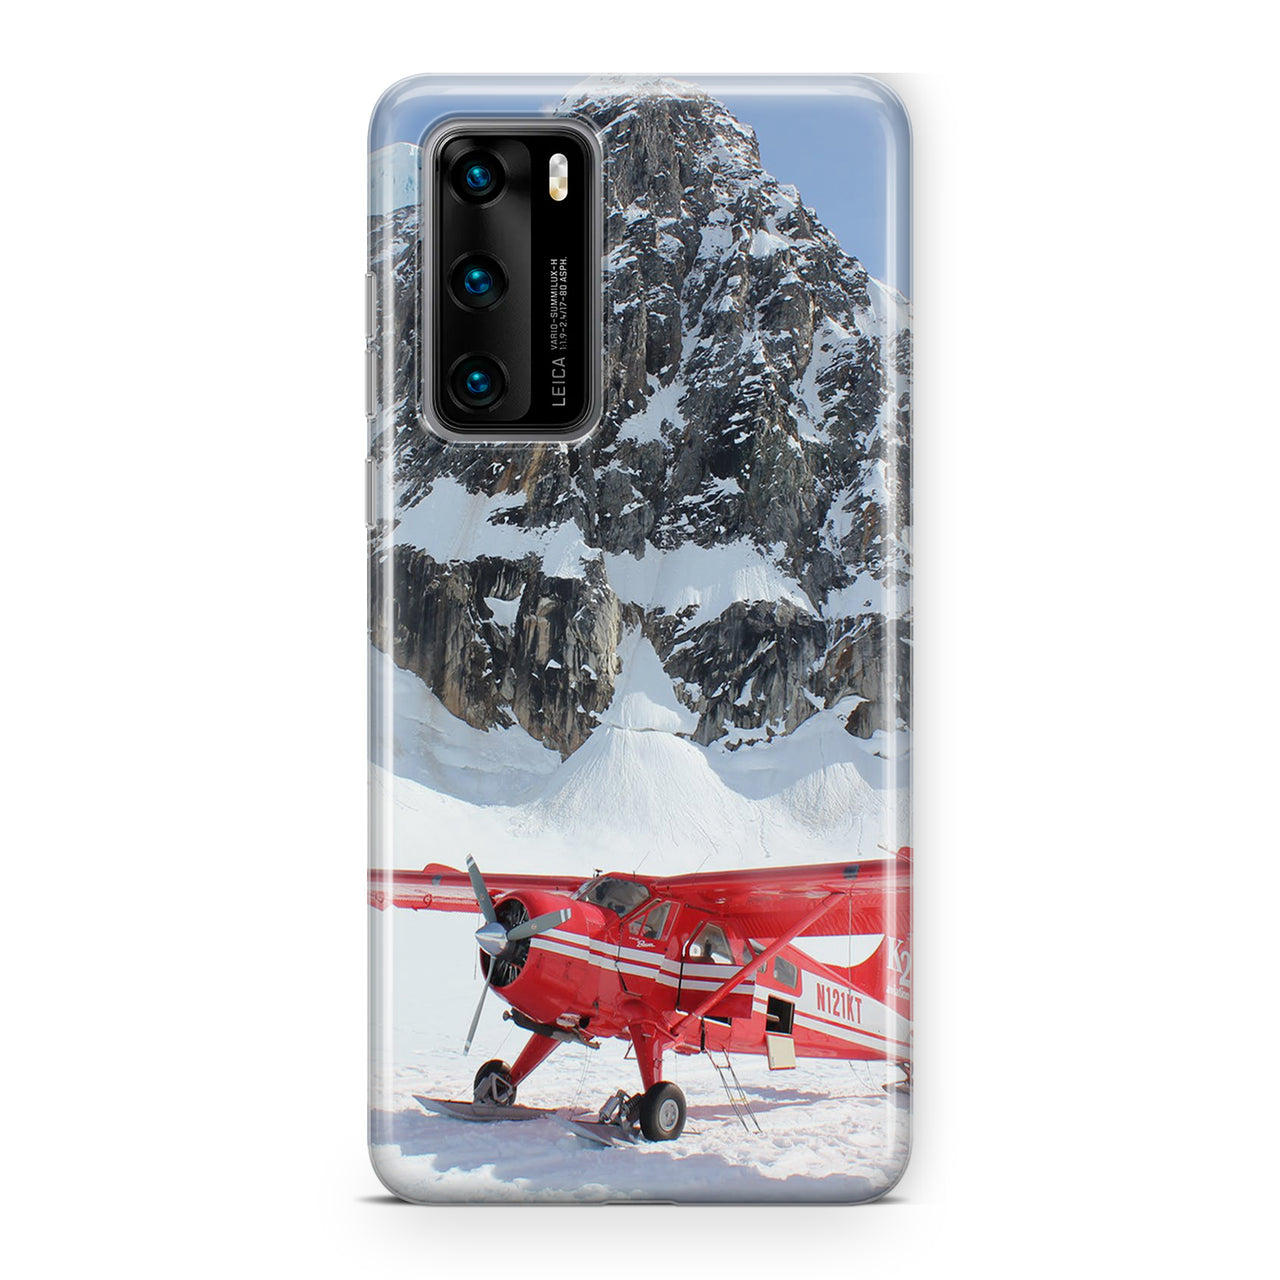 Amazing Snow Airplane Designed Huawei Cases